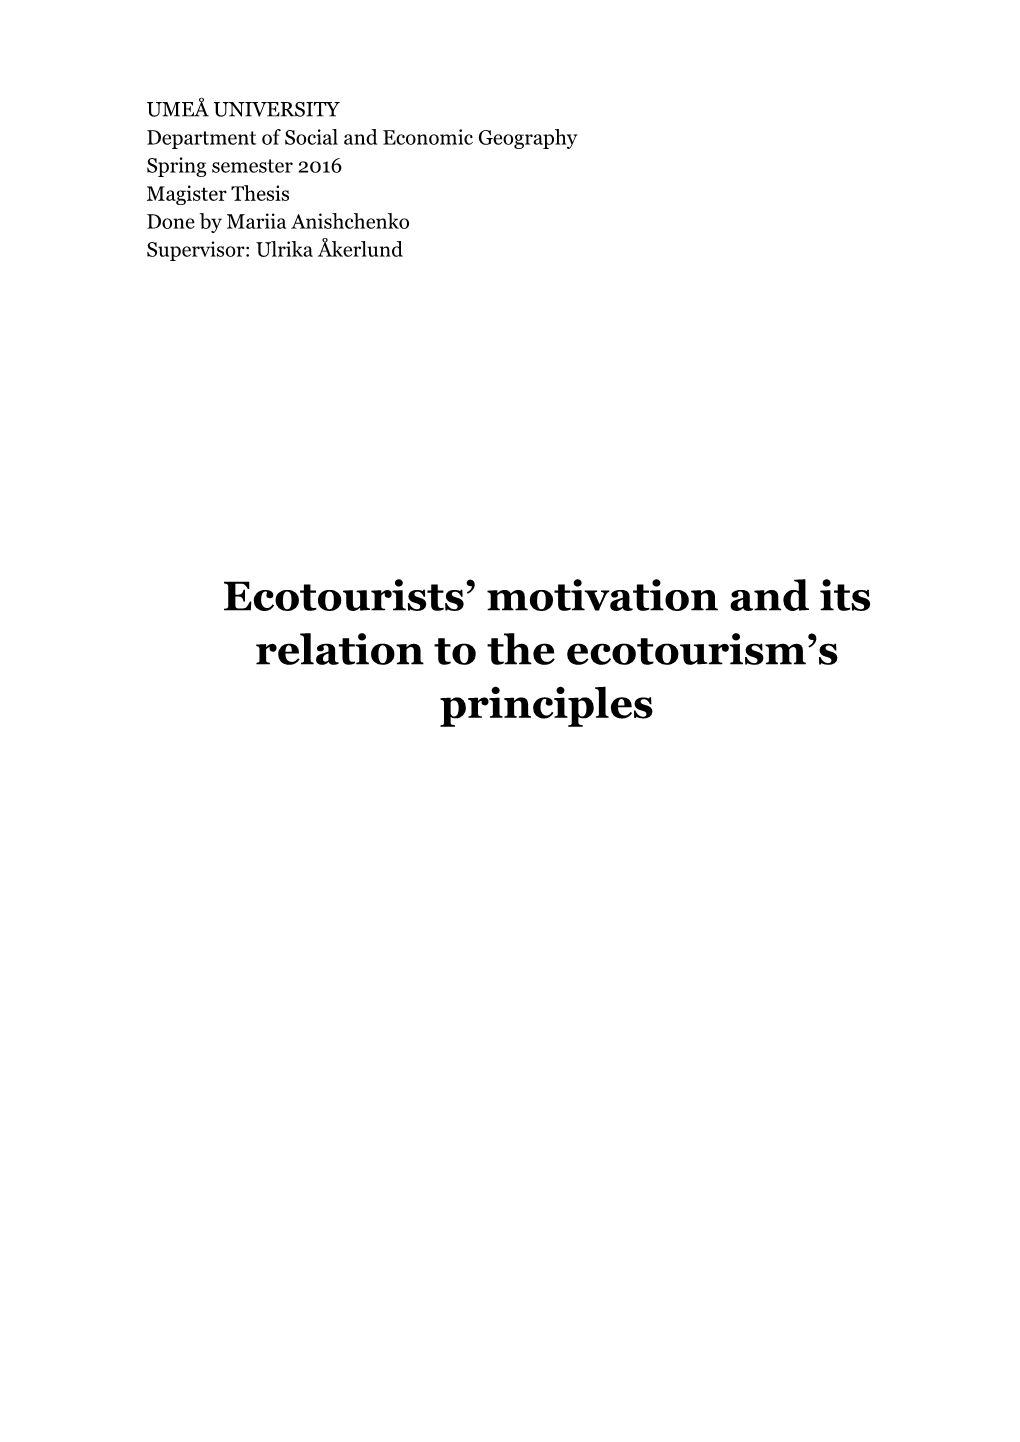 Ecotourists' Motivation and Its Relation to the Ecotourism's Principles